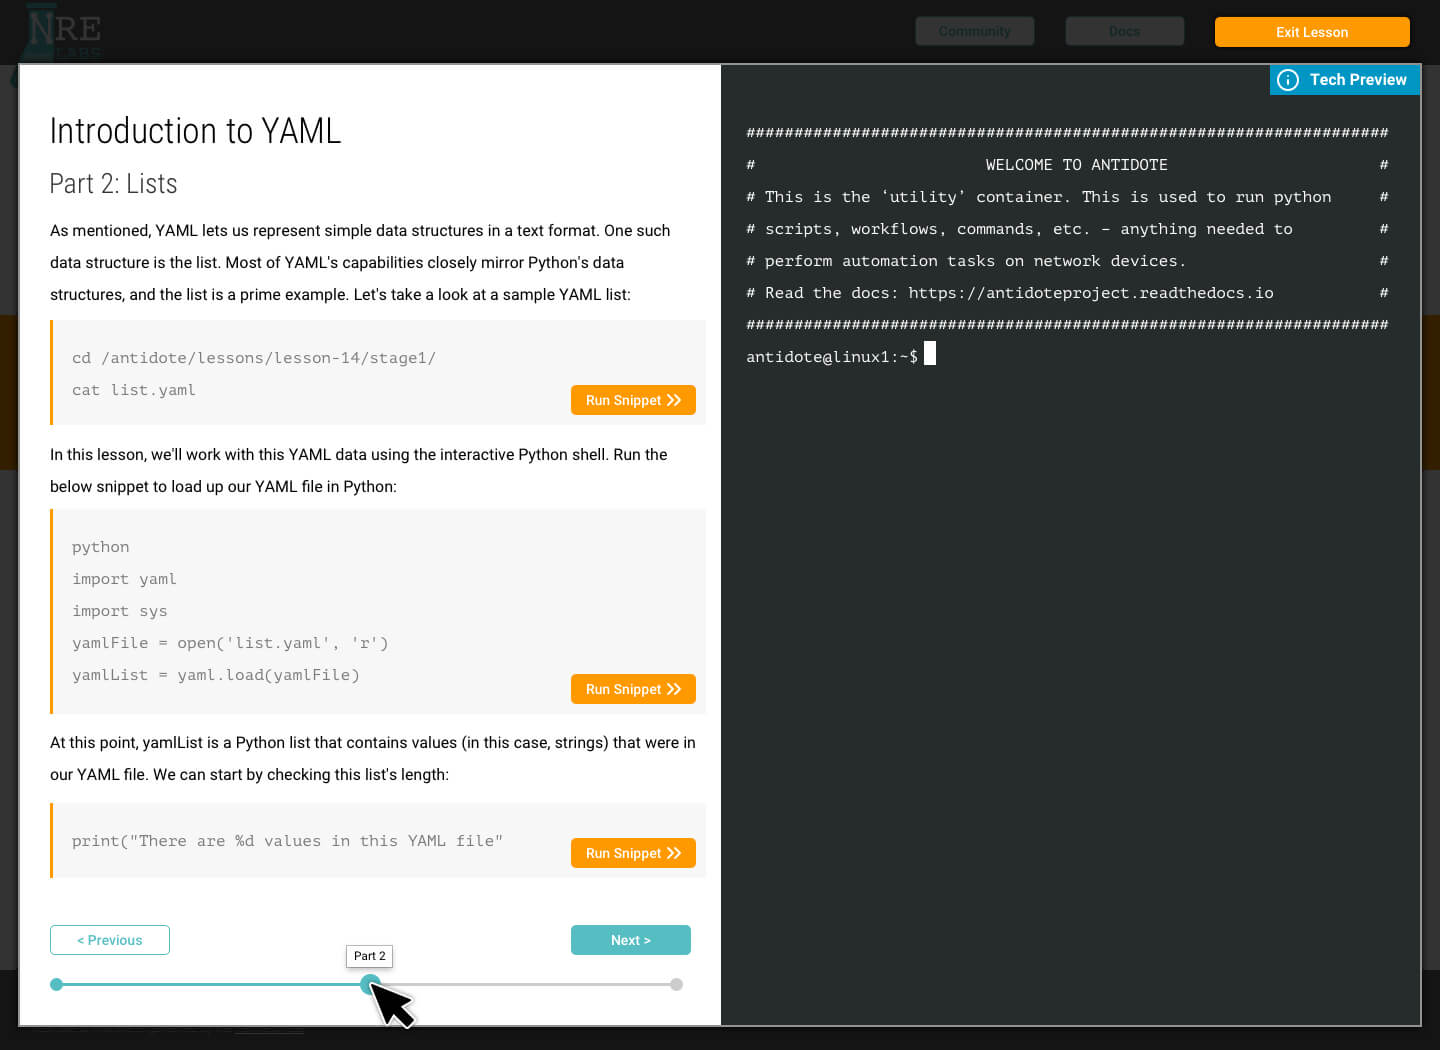 Part 2 of the Introduction to YAML online class